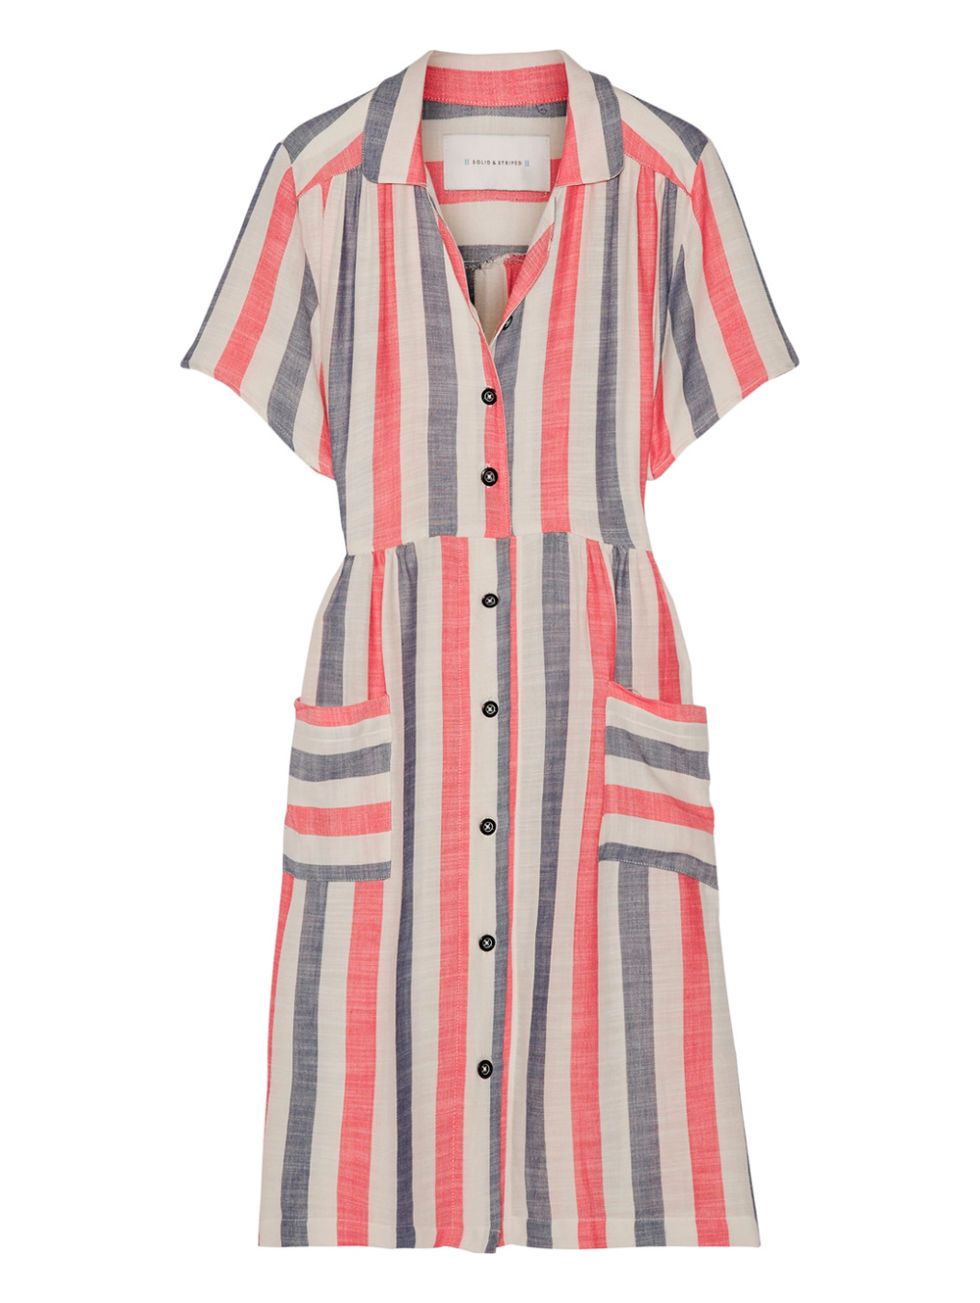 <p>Solid and Striped, € 170 - verkrijgbaar via <a href="http://rstyle.me/n/cpp6igcaqf7" data-tracking-id="recirc-text-link" target="_blank">Net-a-porter.com</a></p>